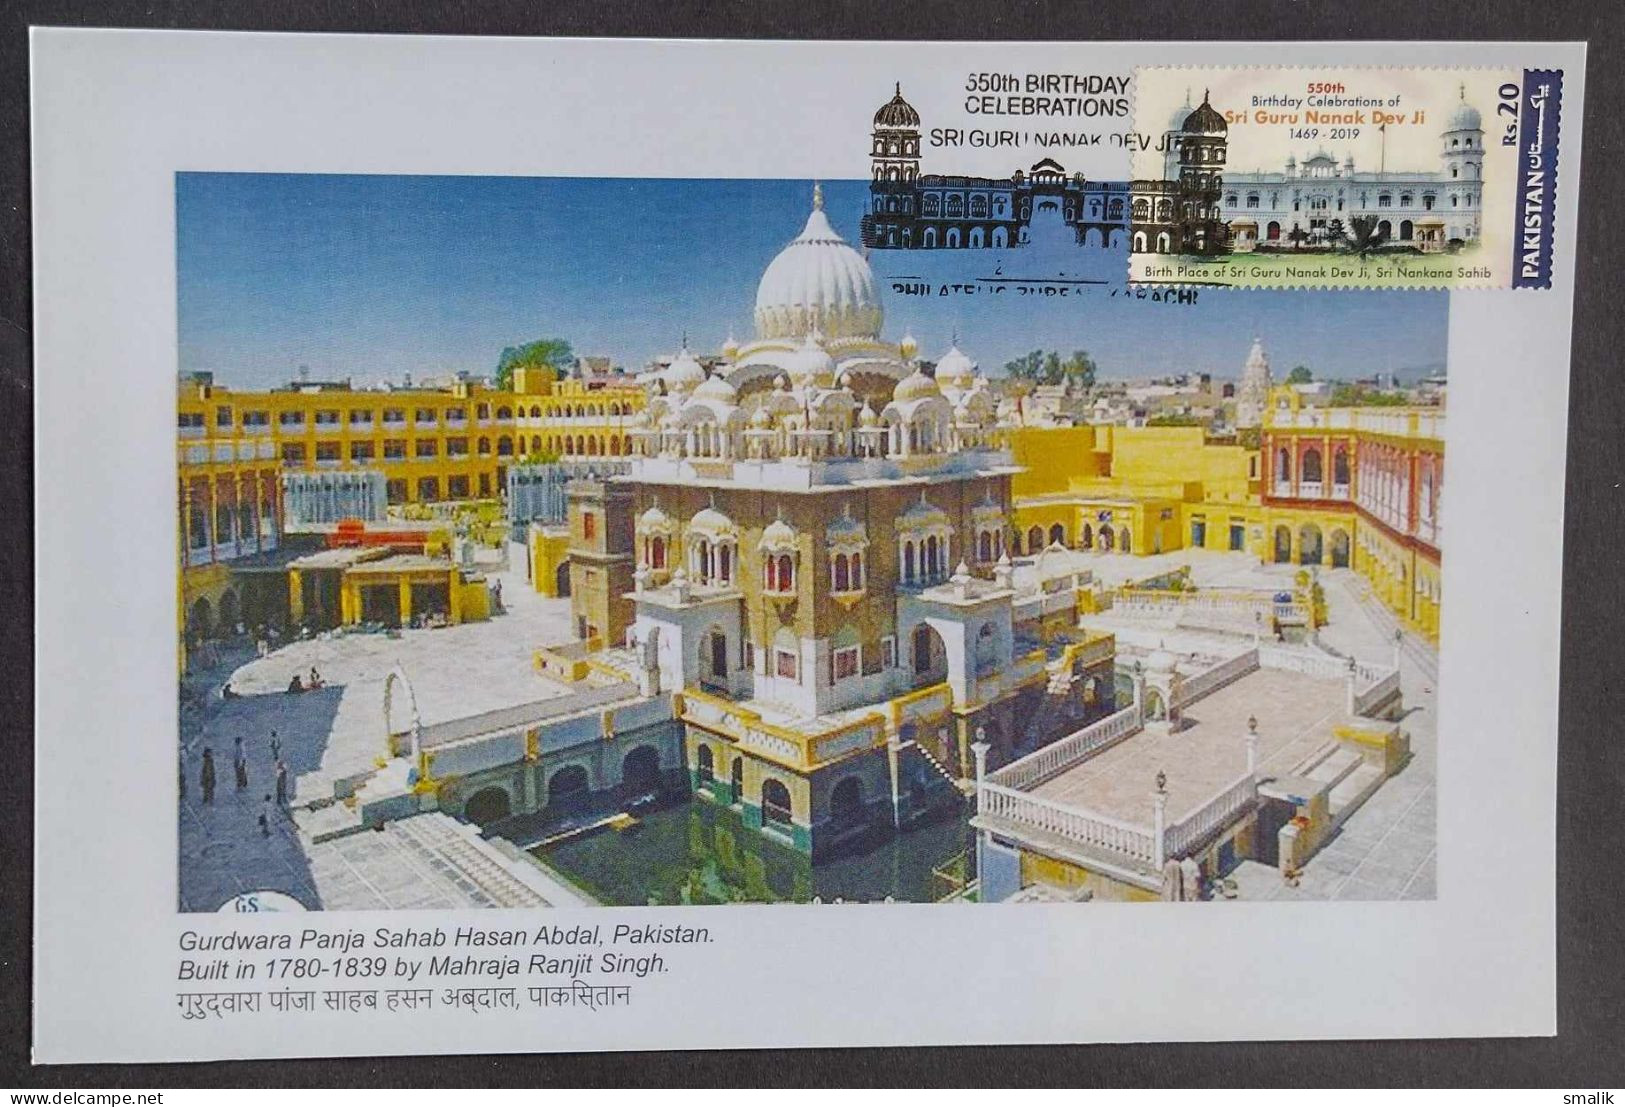 PAKISTAN Picture POST CARD 2019 - Officially Issued On 550th Birthday Of Sri Guru Nanak Dev Ji, Stamped & First Day Canc - Pakistán